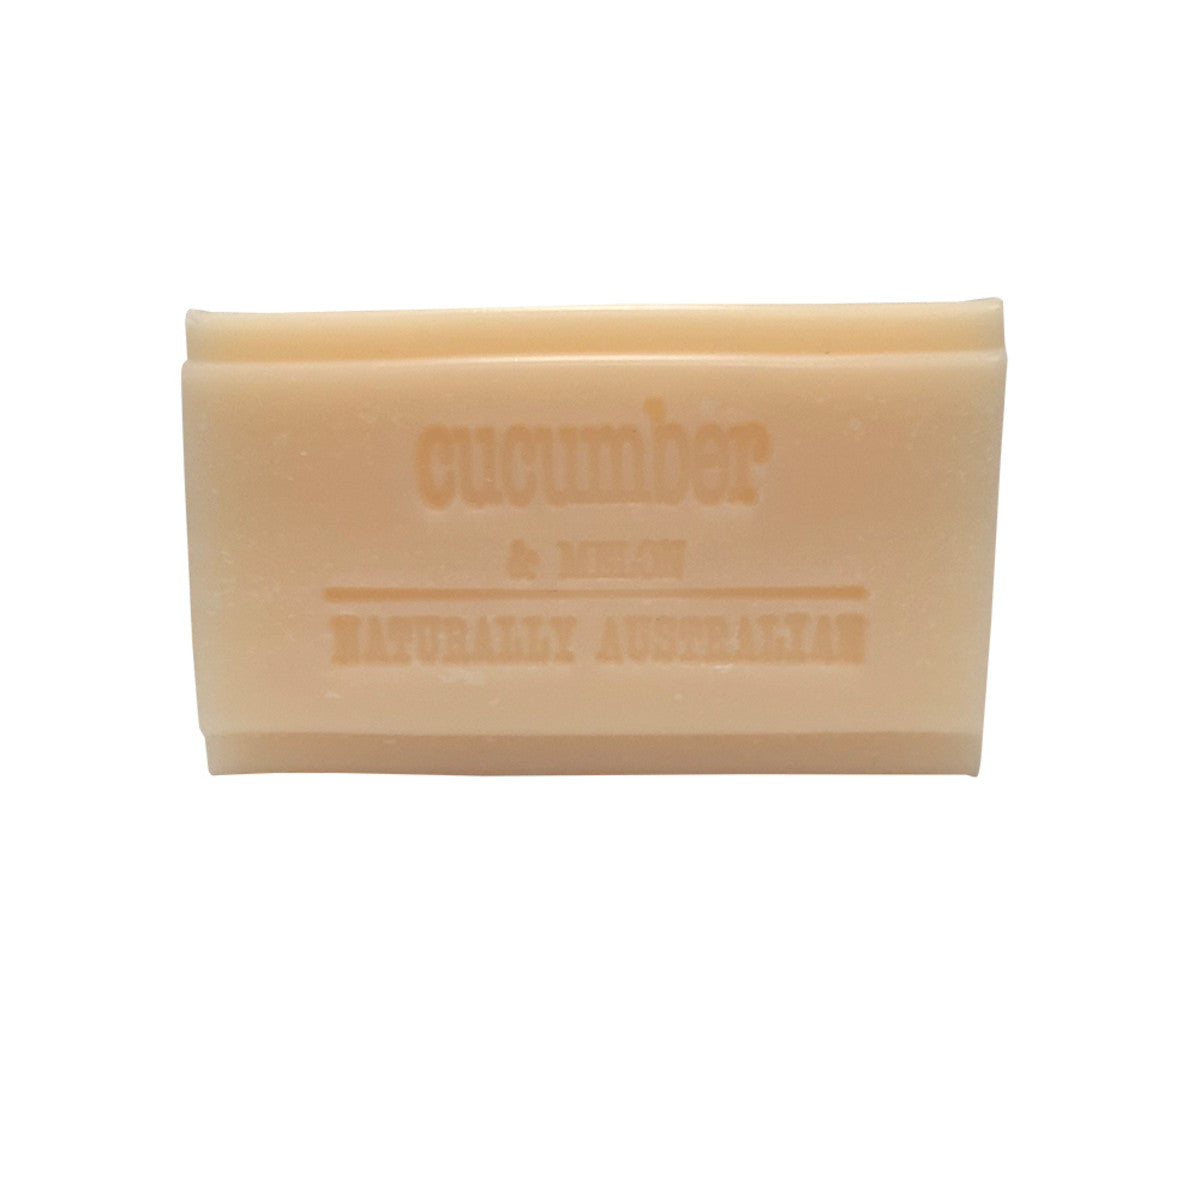 Clover Fields - Cucumber and Melon Soap